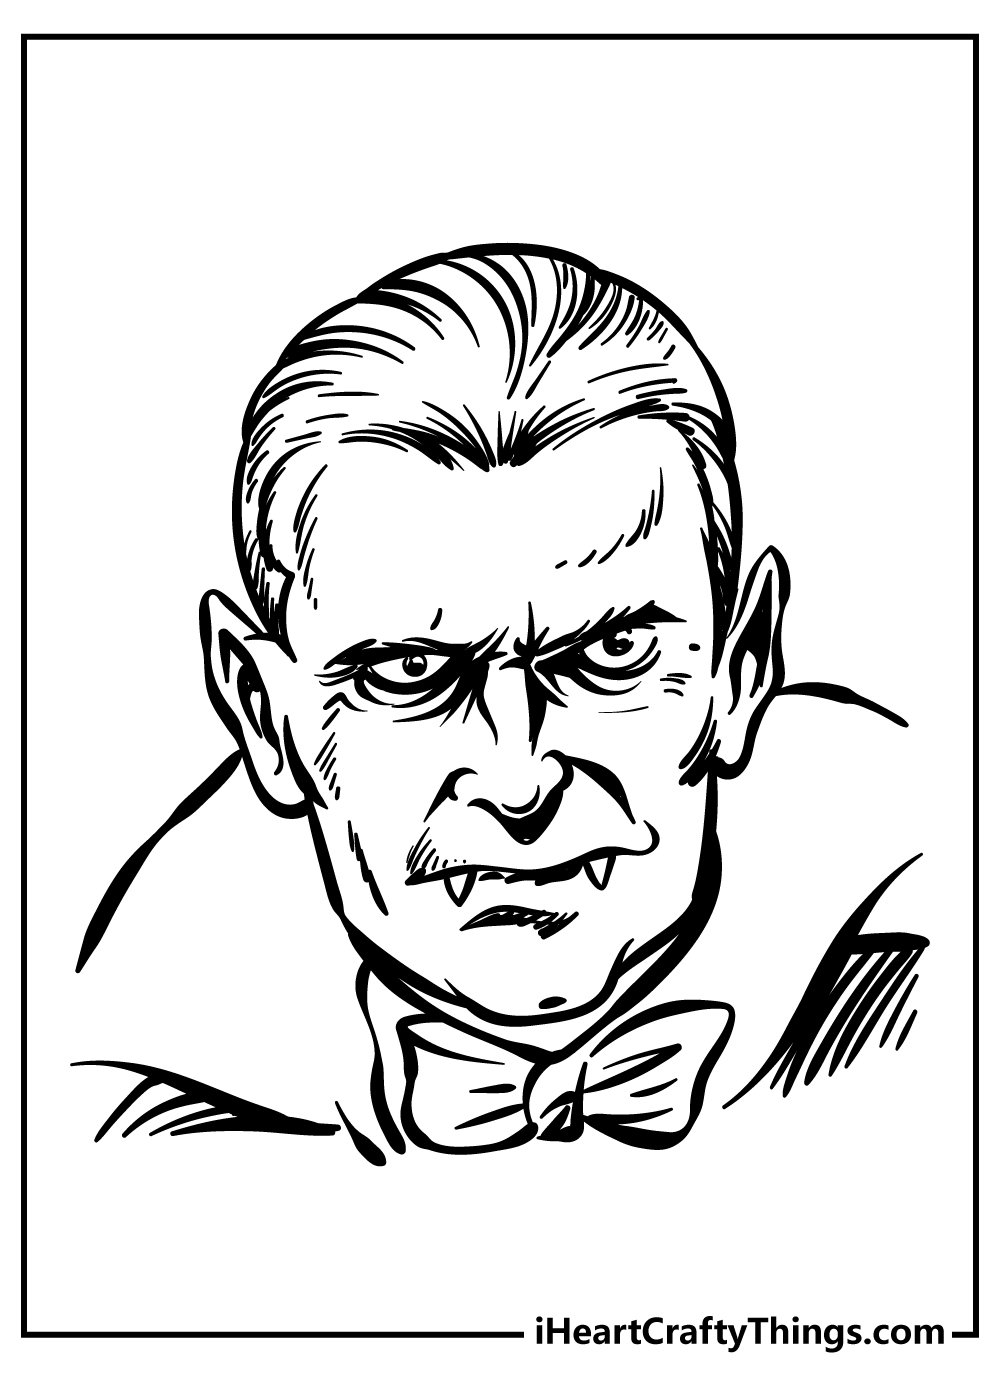 Count Dracula Coloring Pages for kids free download